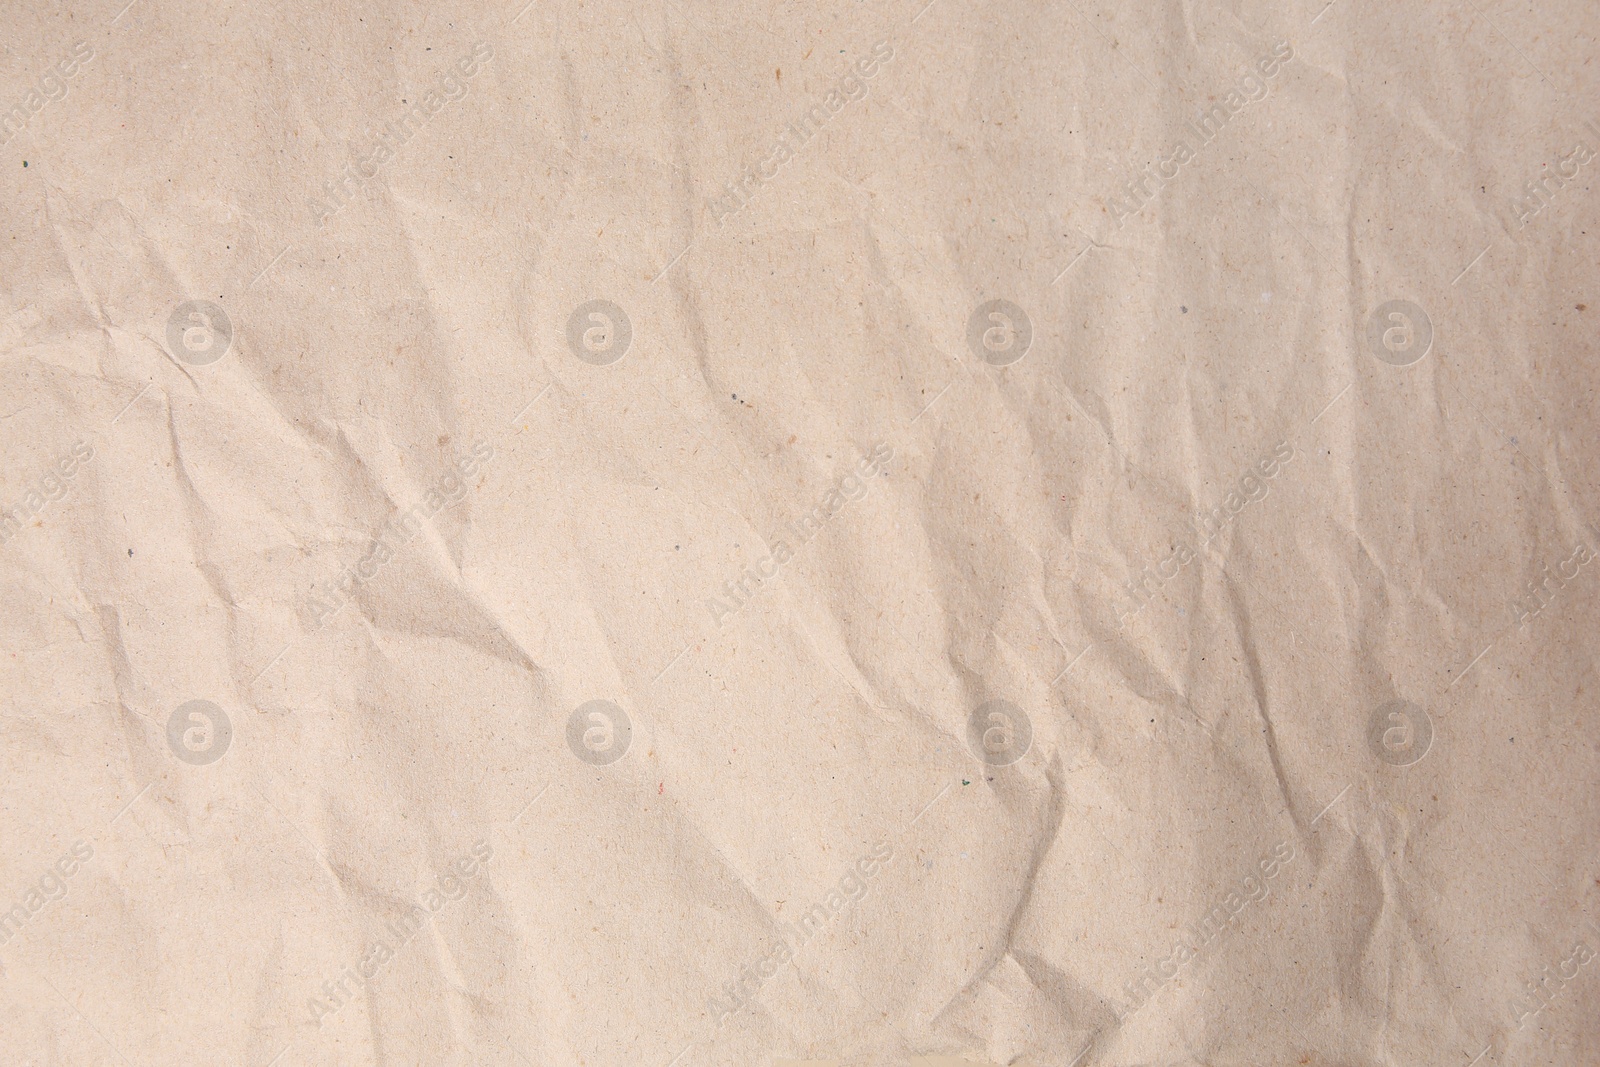 Photo of Sheet of crumpled light brown paper as background, top view